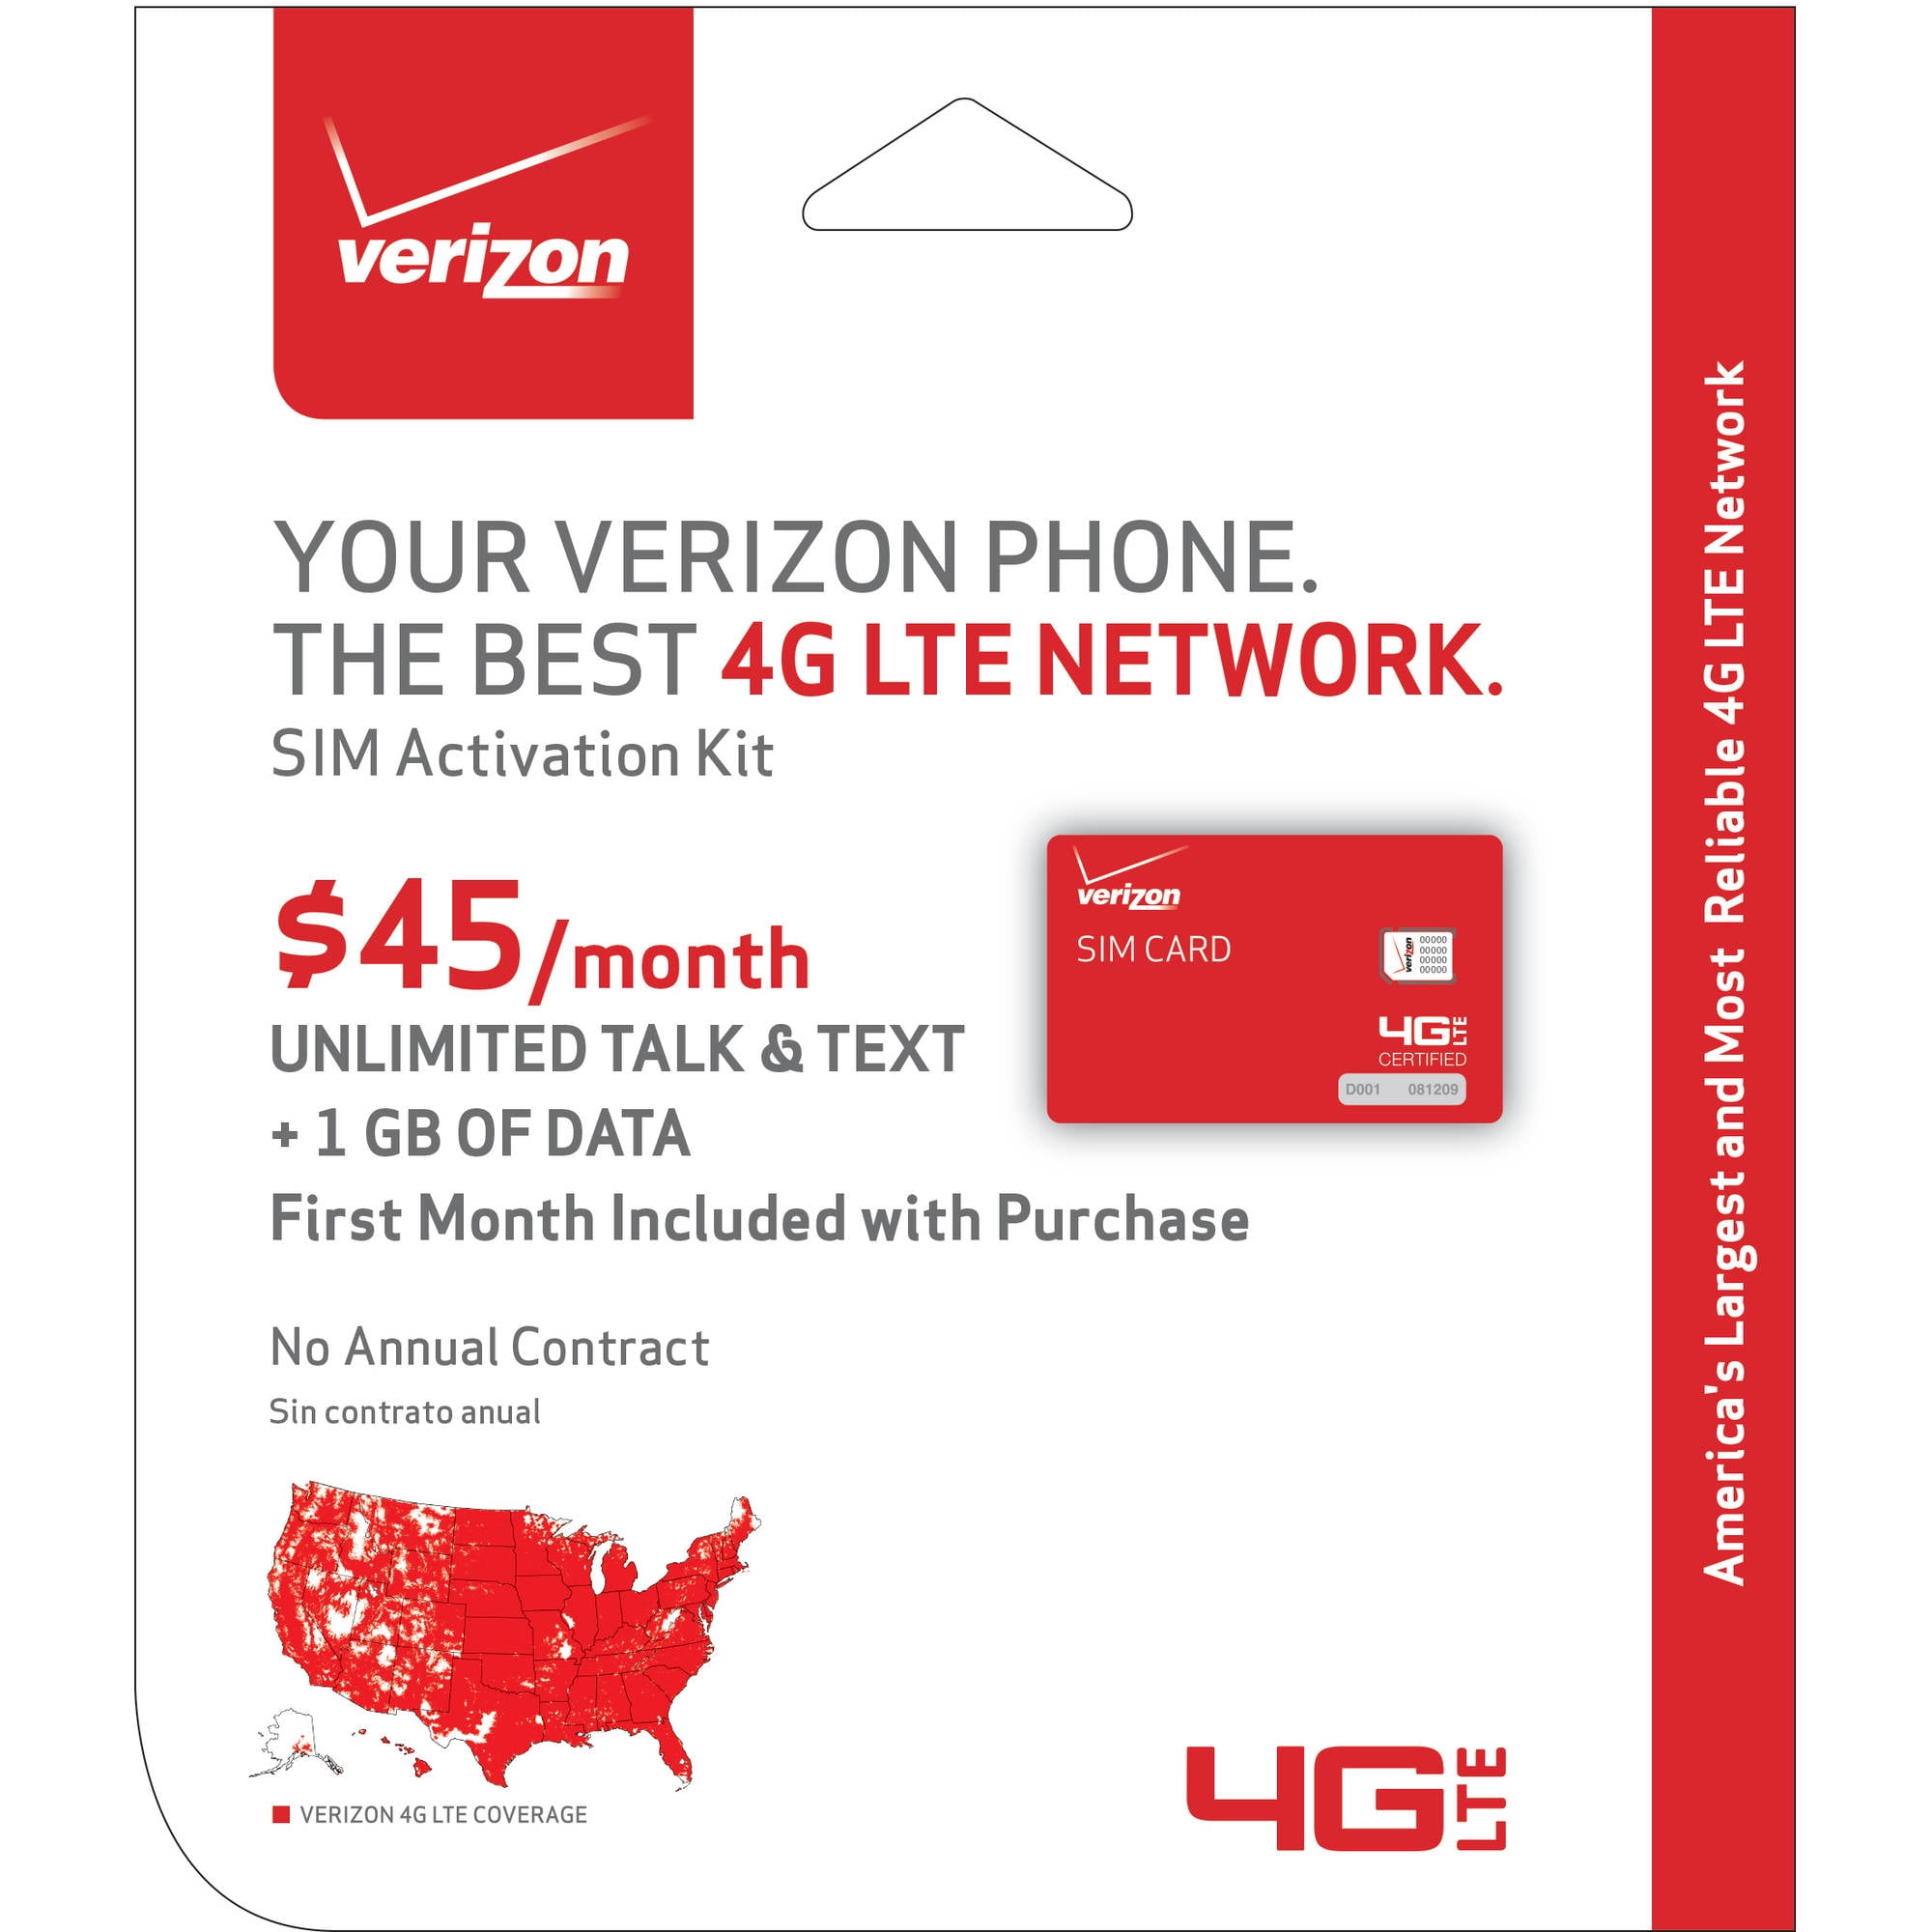 can i buy a verizon prepaid phone and activate it on a contract